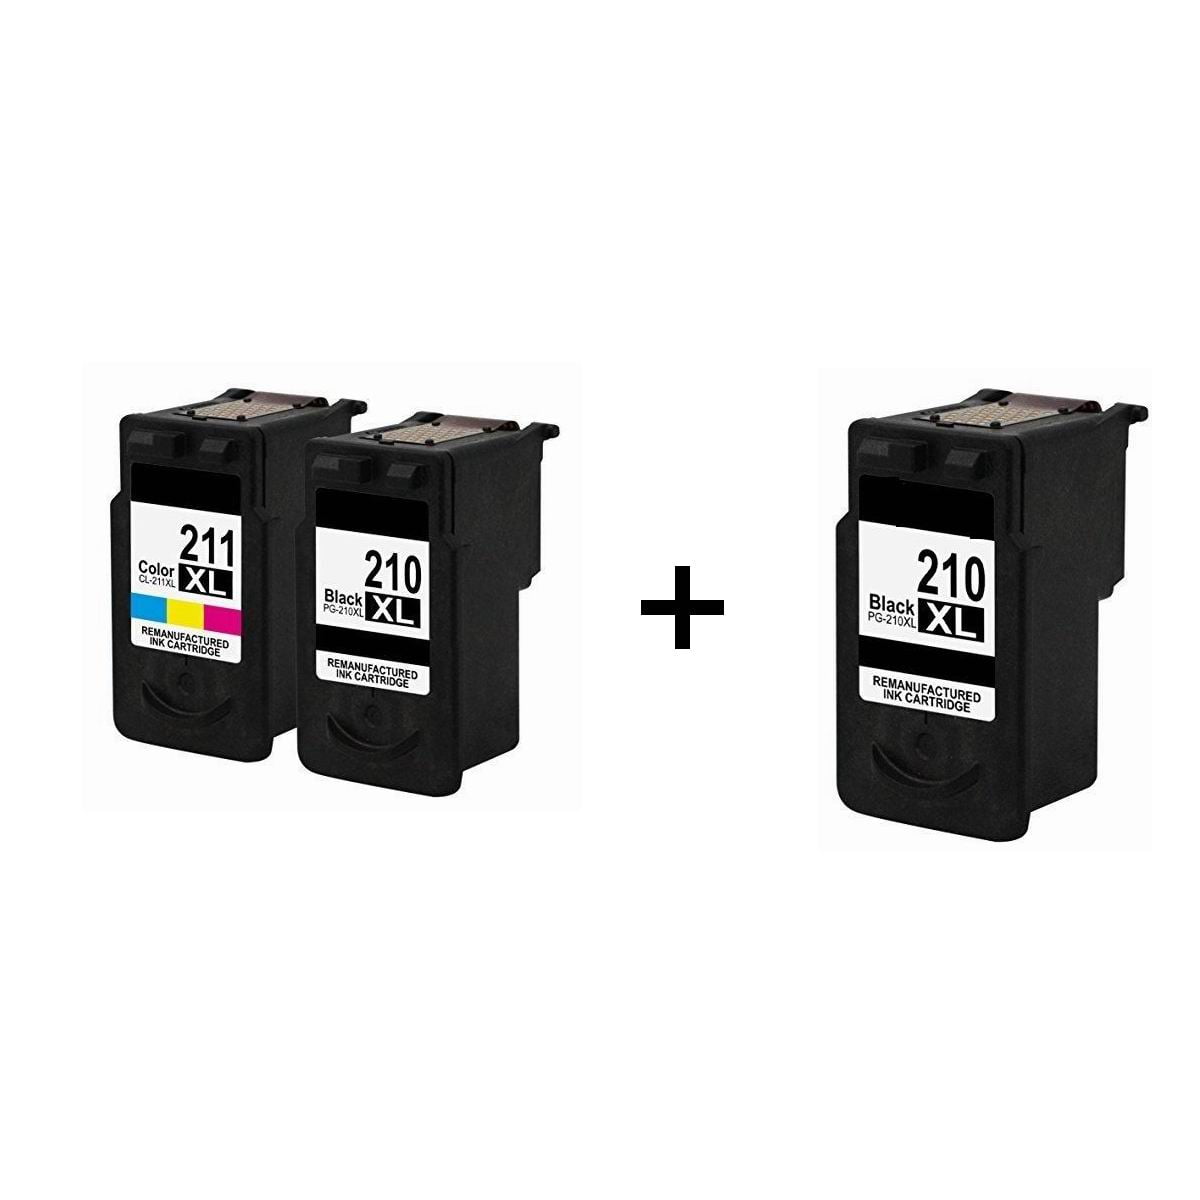 2 Black 2 Pack Remanufactured Ink Cartridge Replacement for Canon PG 210XL Comptaible with Canon MP495 MP250 MX320 MX410 iP2702 MP280 MX340 MX330 MP240 iP2700 MX420 MP270 MX360 MP490 MP480 MX350 ect 